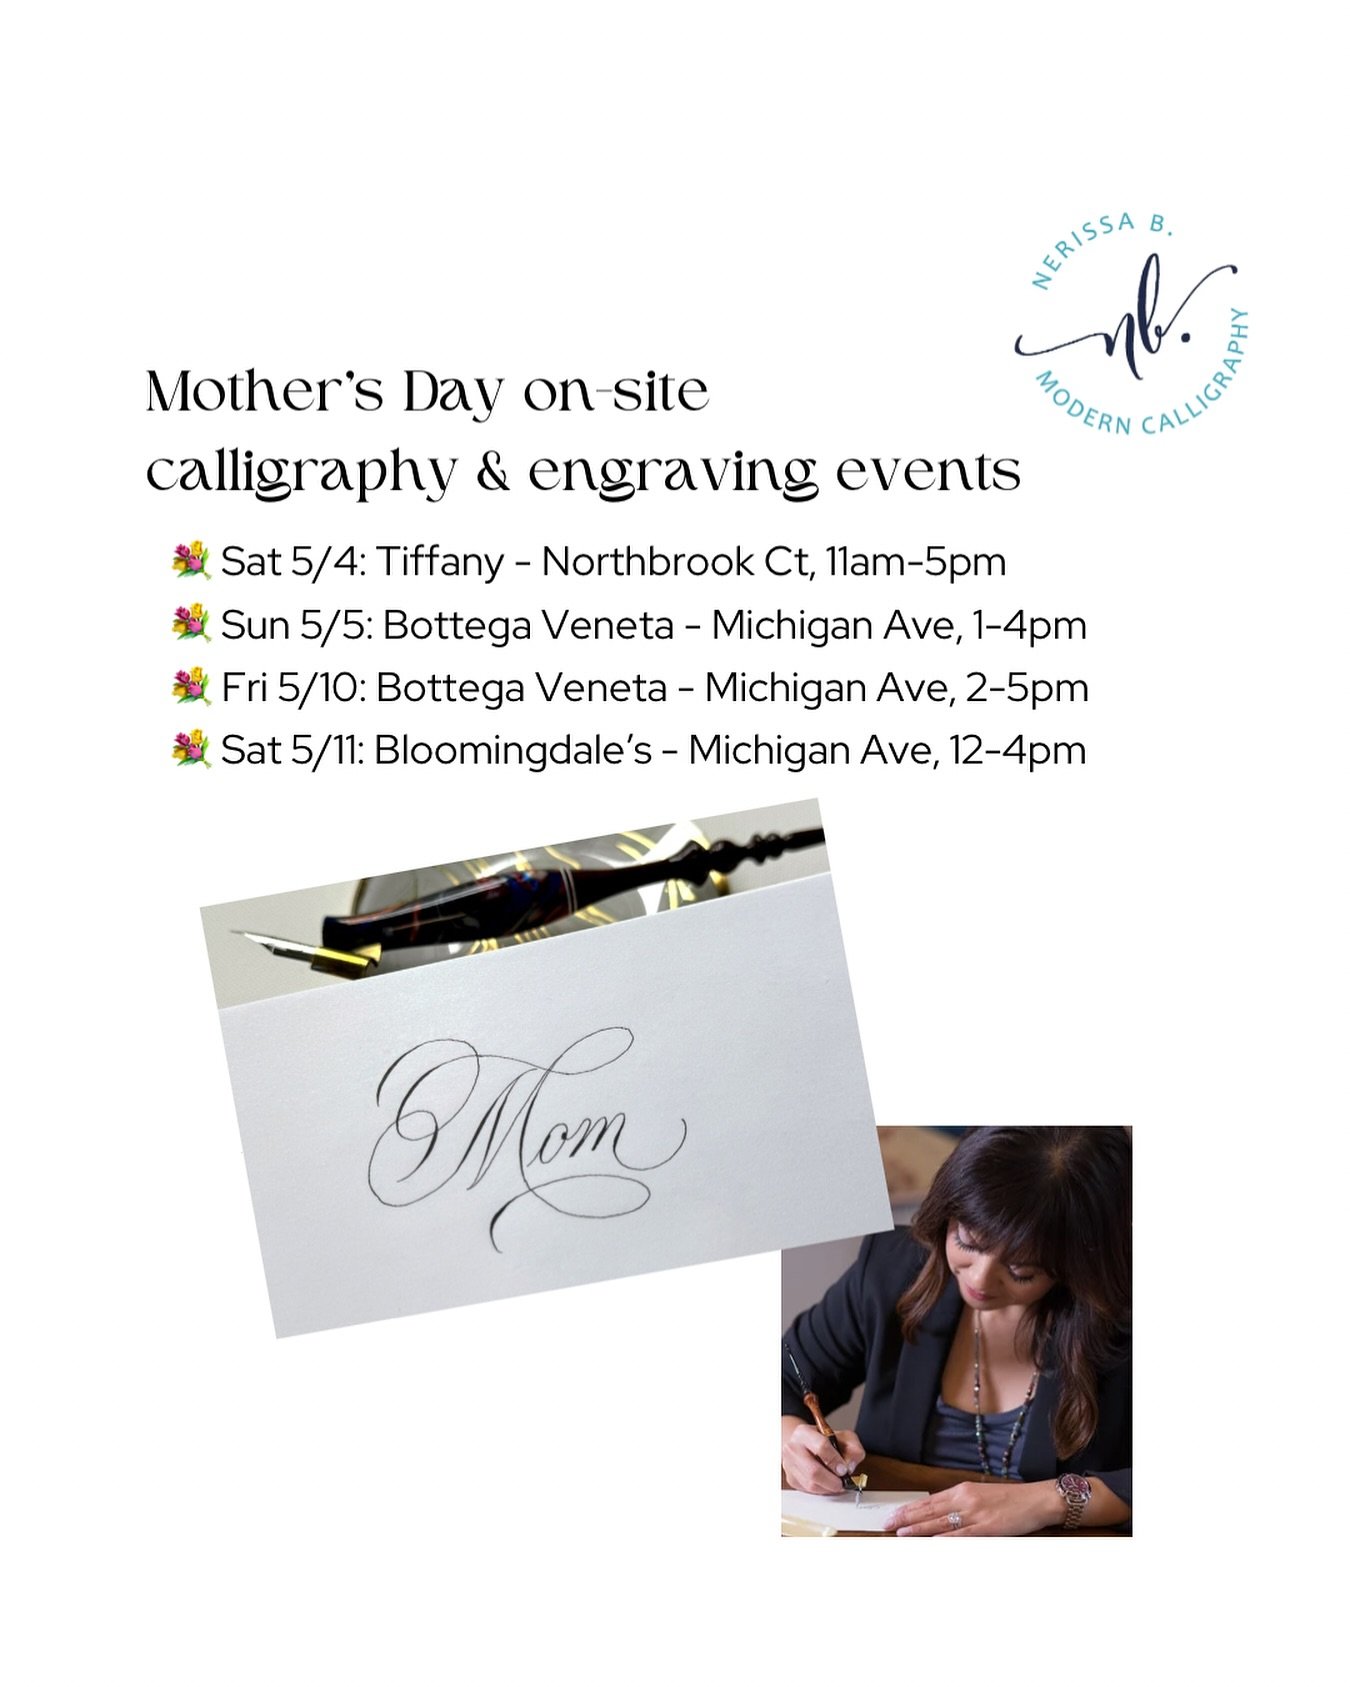 Well it&rsquo;s been a minute, hasn&rsquo;t it? May days are here already, which means it&rsquo;s time for Mother&rsquo;s Day on-site events! Looking forward to adding a touch of added elegance to some lovely gifts over the next couple of weeks... 🖋